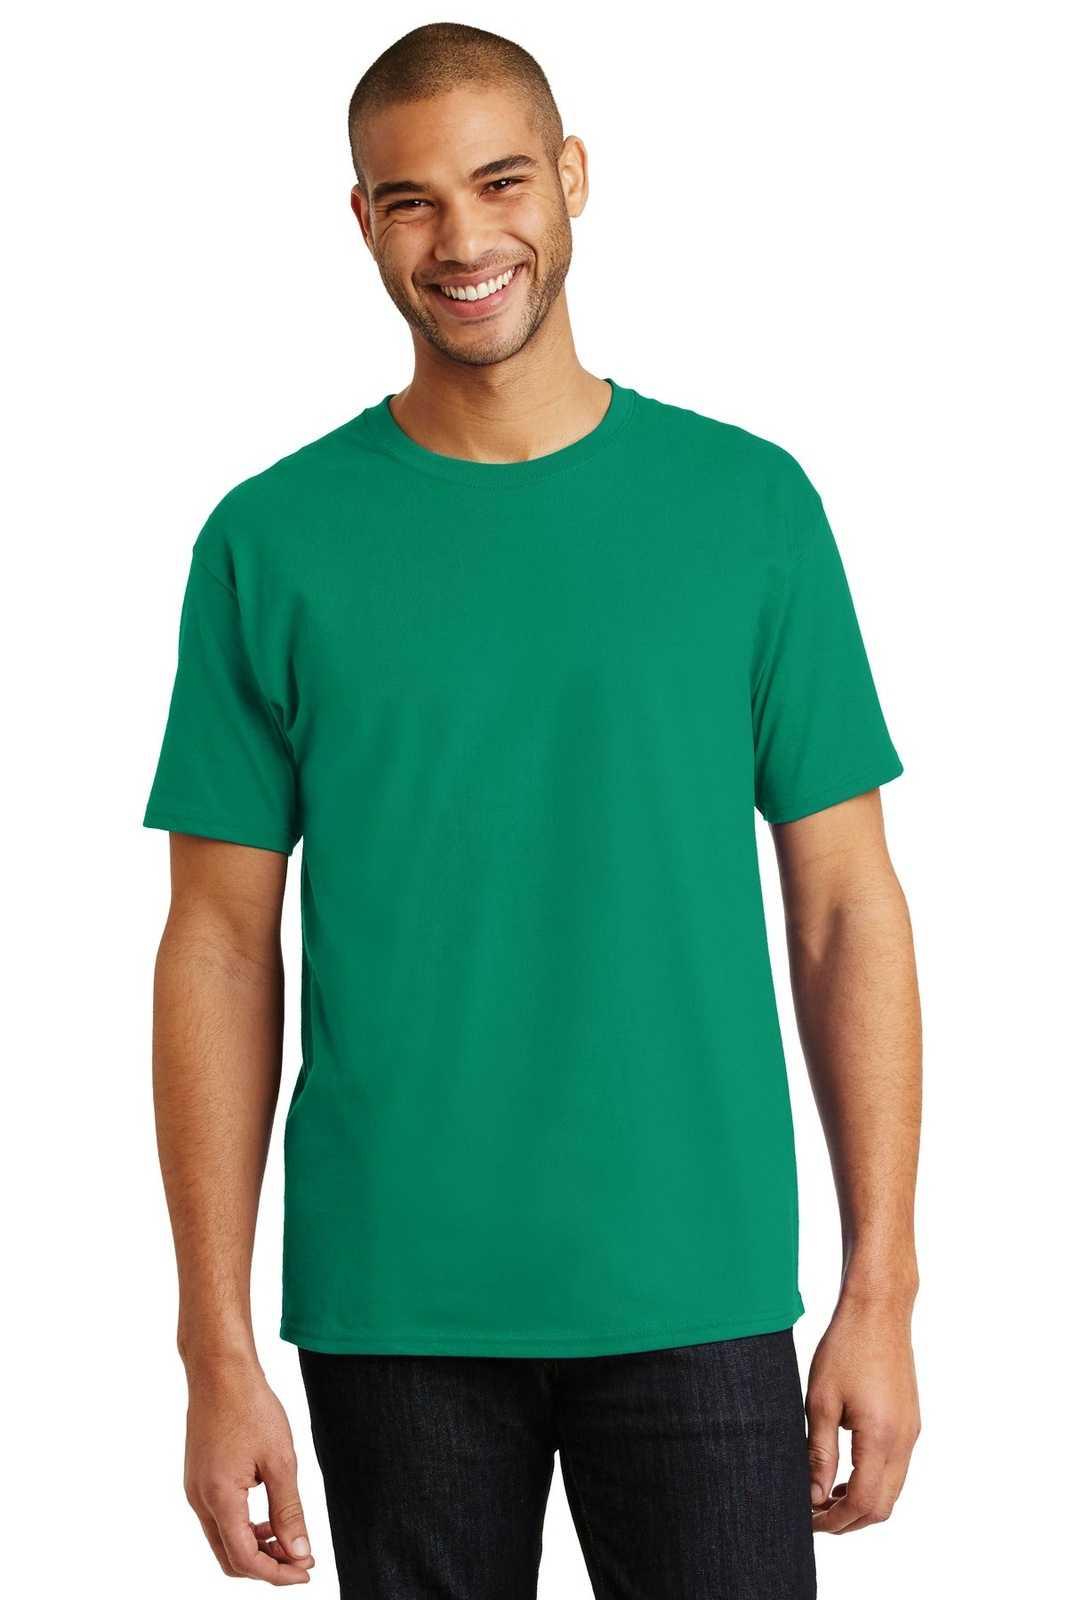 Hanes 5250 Tagless 100% Cotton T-Shirt - Kelly Green - HIT a Double